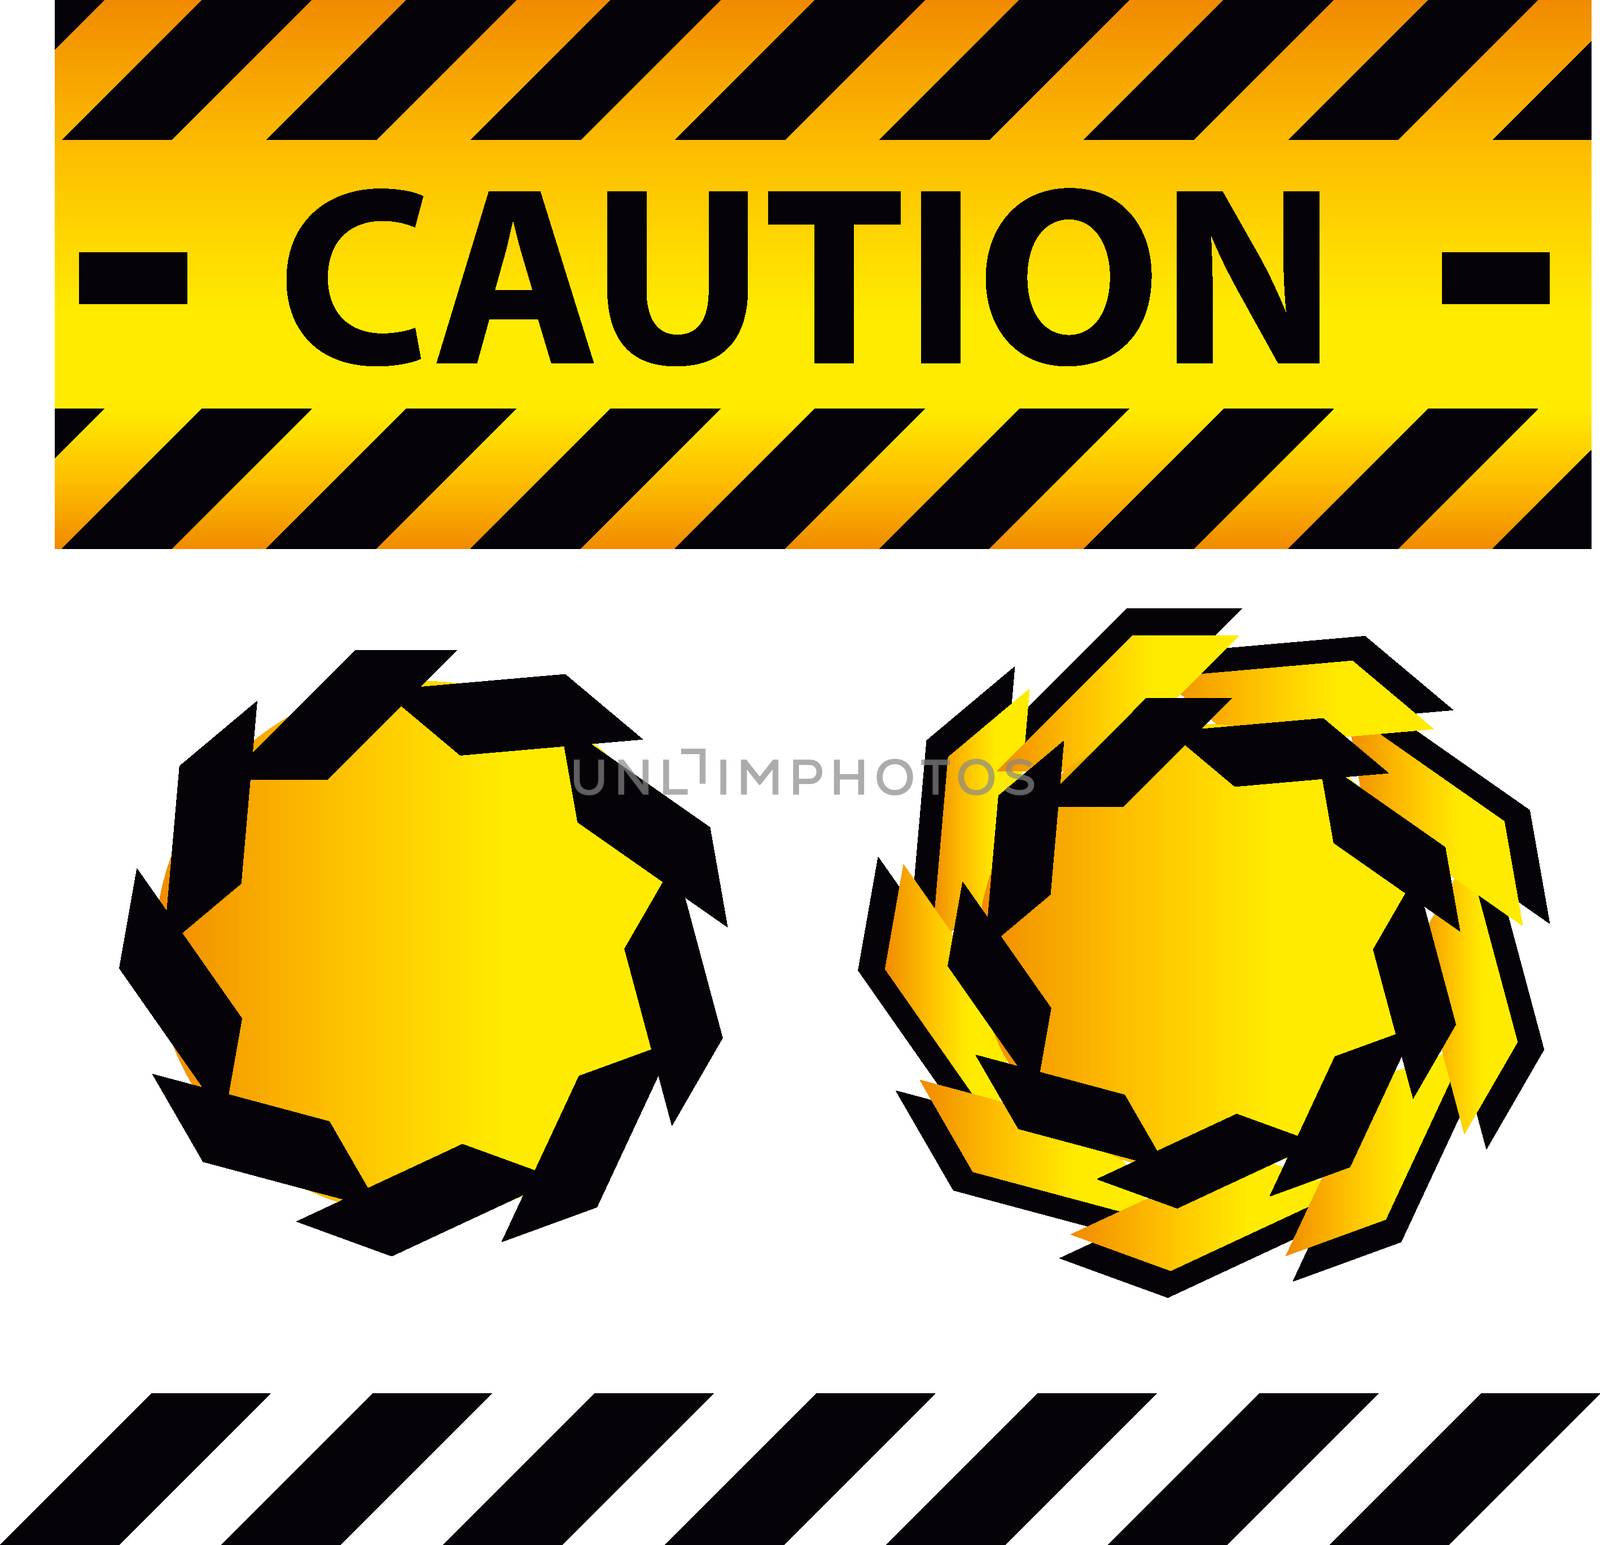 Caution or danger and police tape attention with lables stickers and design elements set